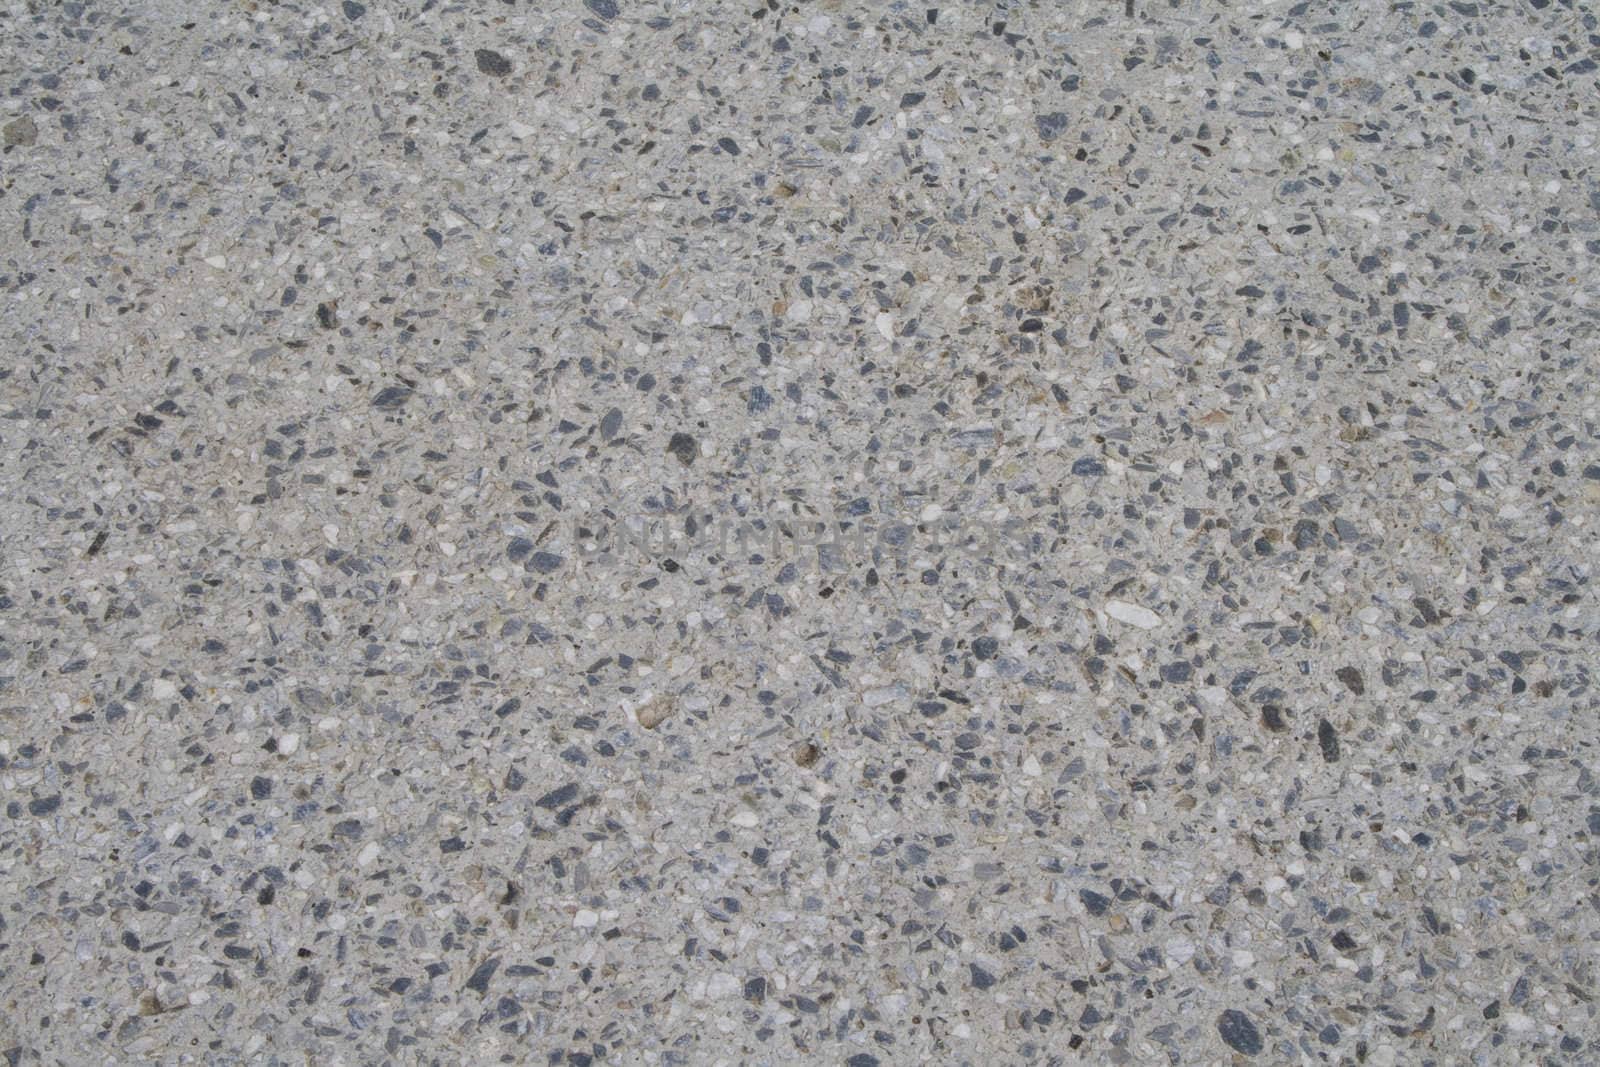 Cement floor, great for backgrounds and textures